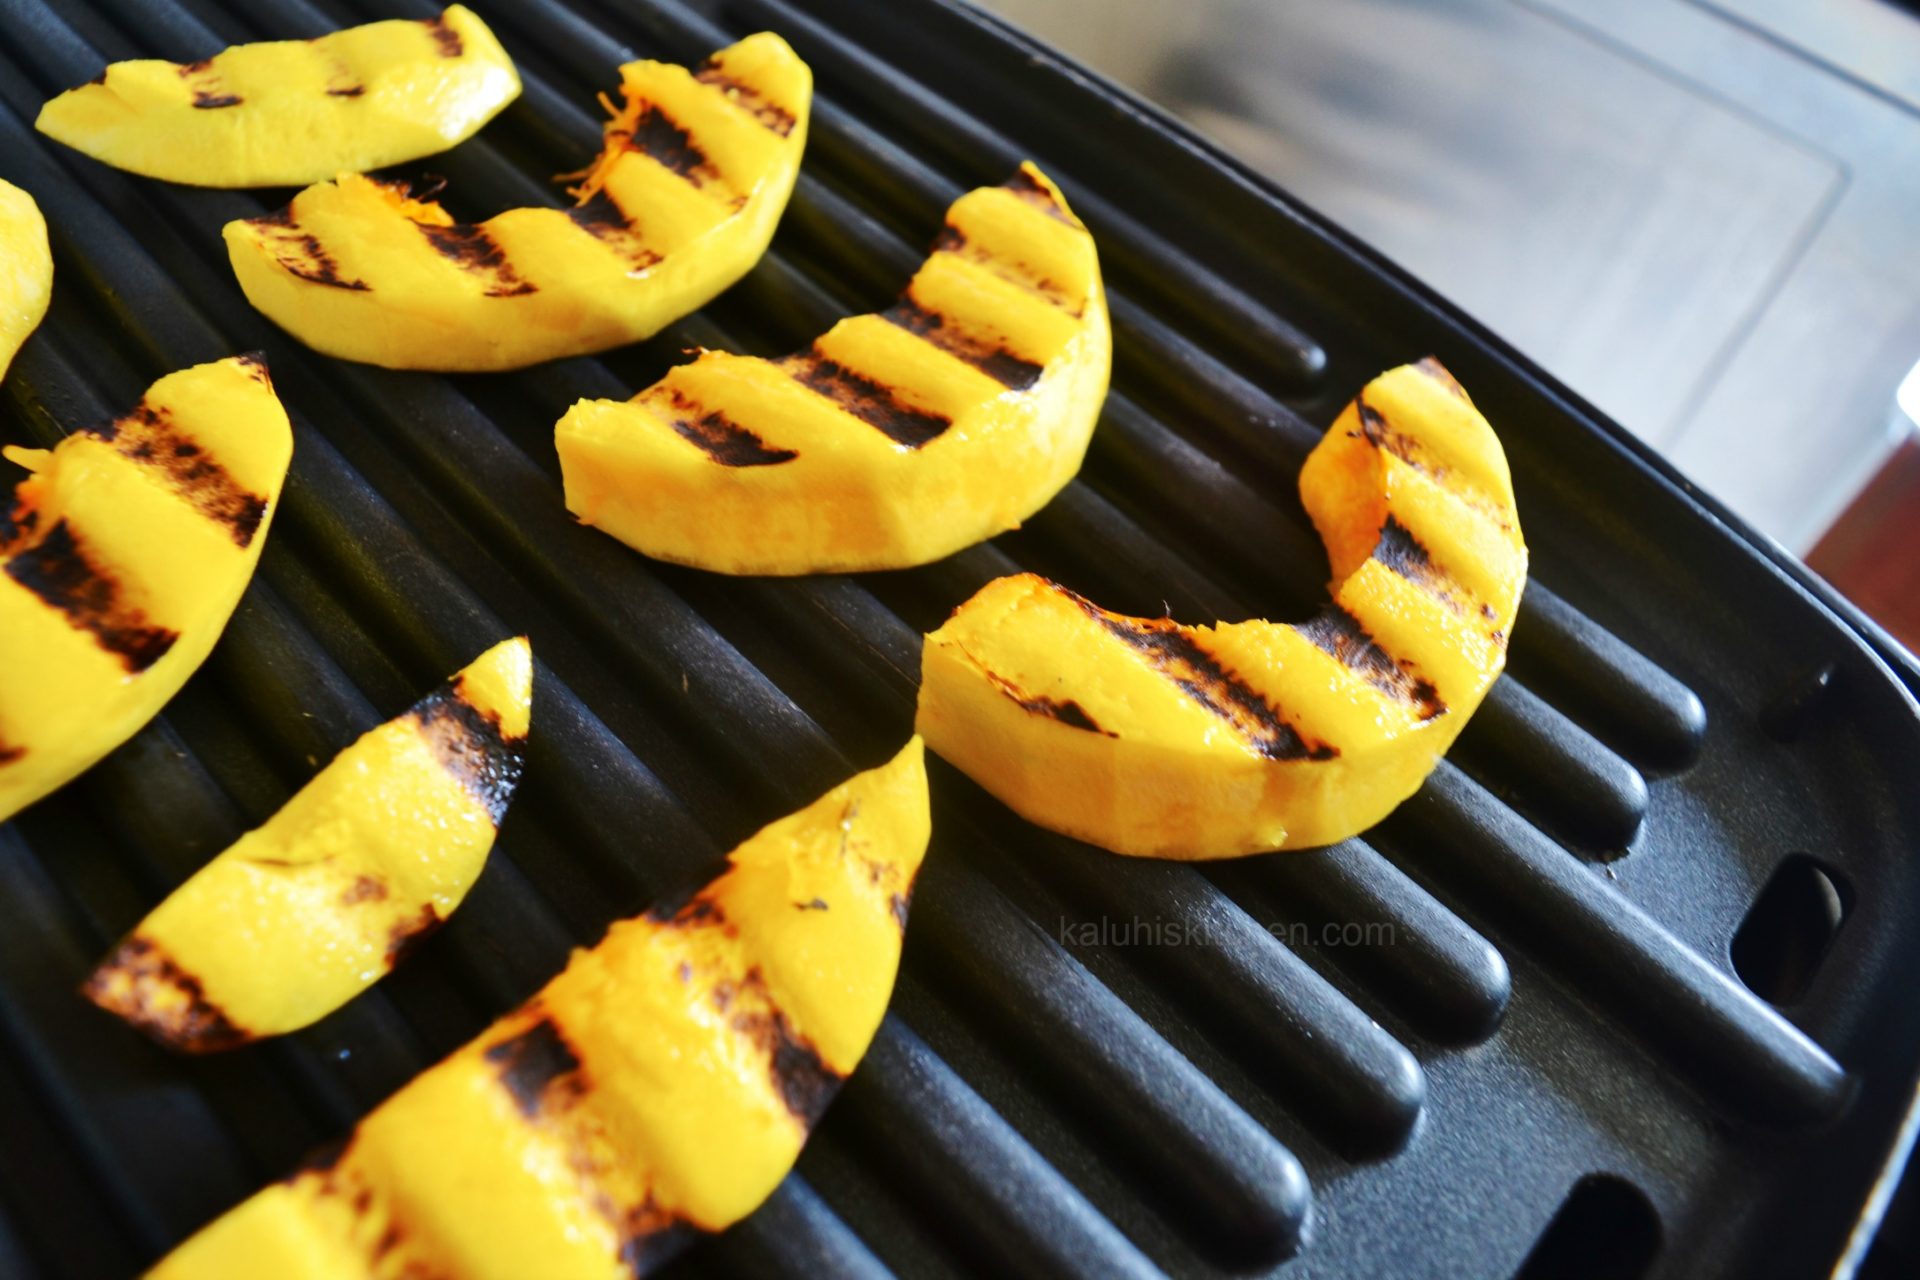 grilling the pumpkin develops the flavor and enhances the sweetnes making the end result very delicious_kaluhiskitchen.com_kenyan food blogger